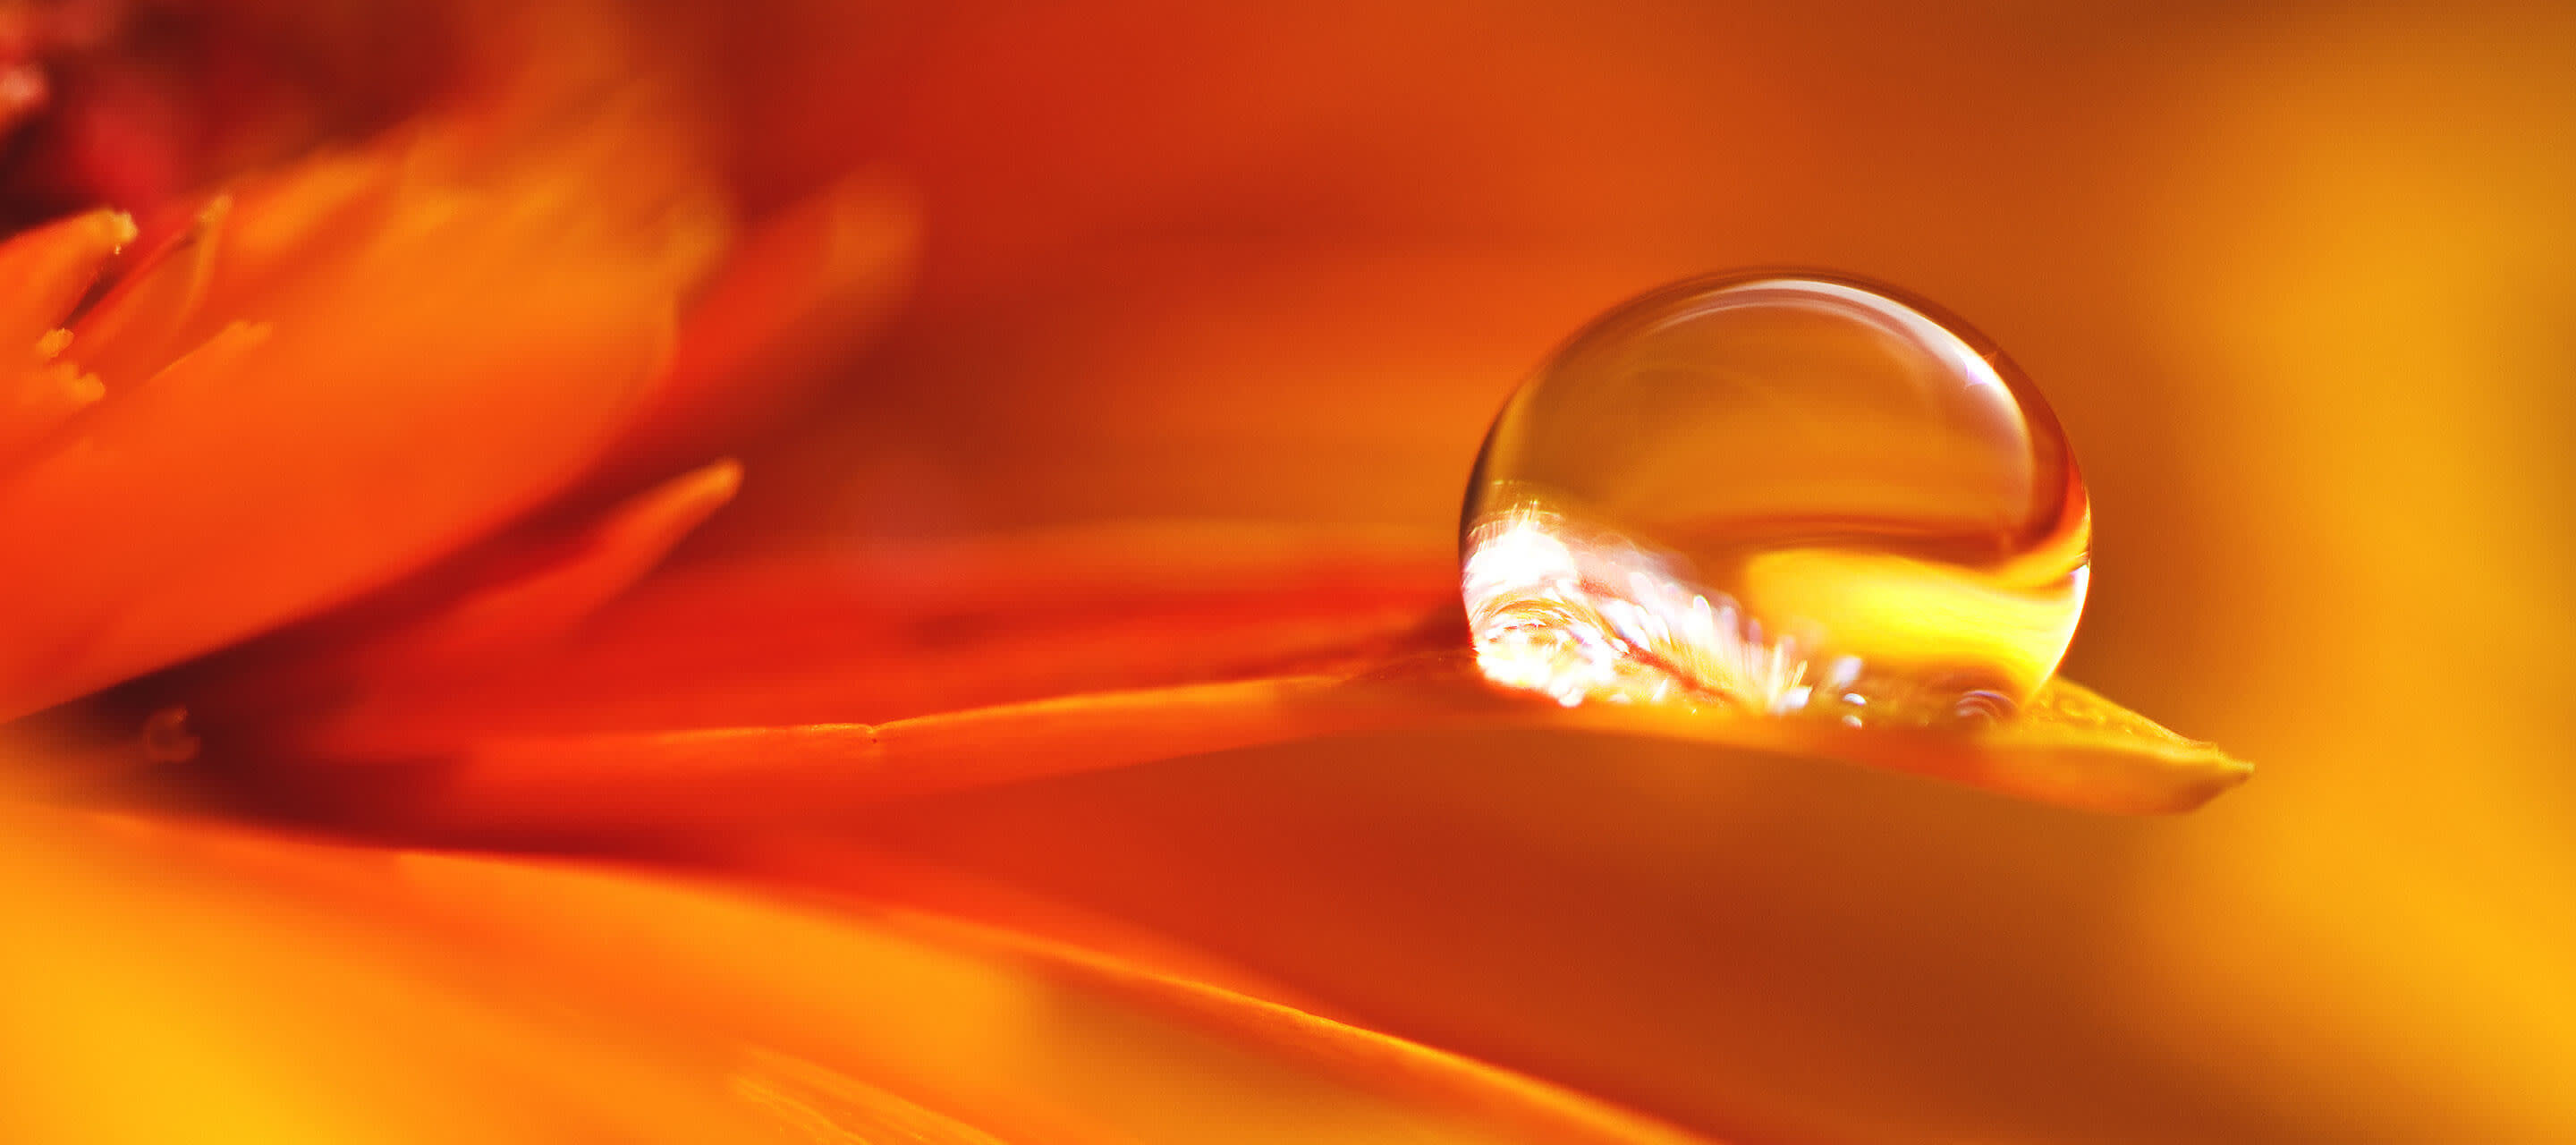 yellow flower petal with droplet